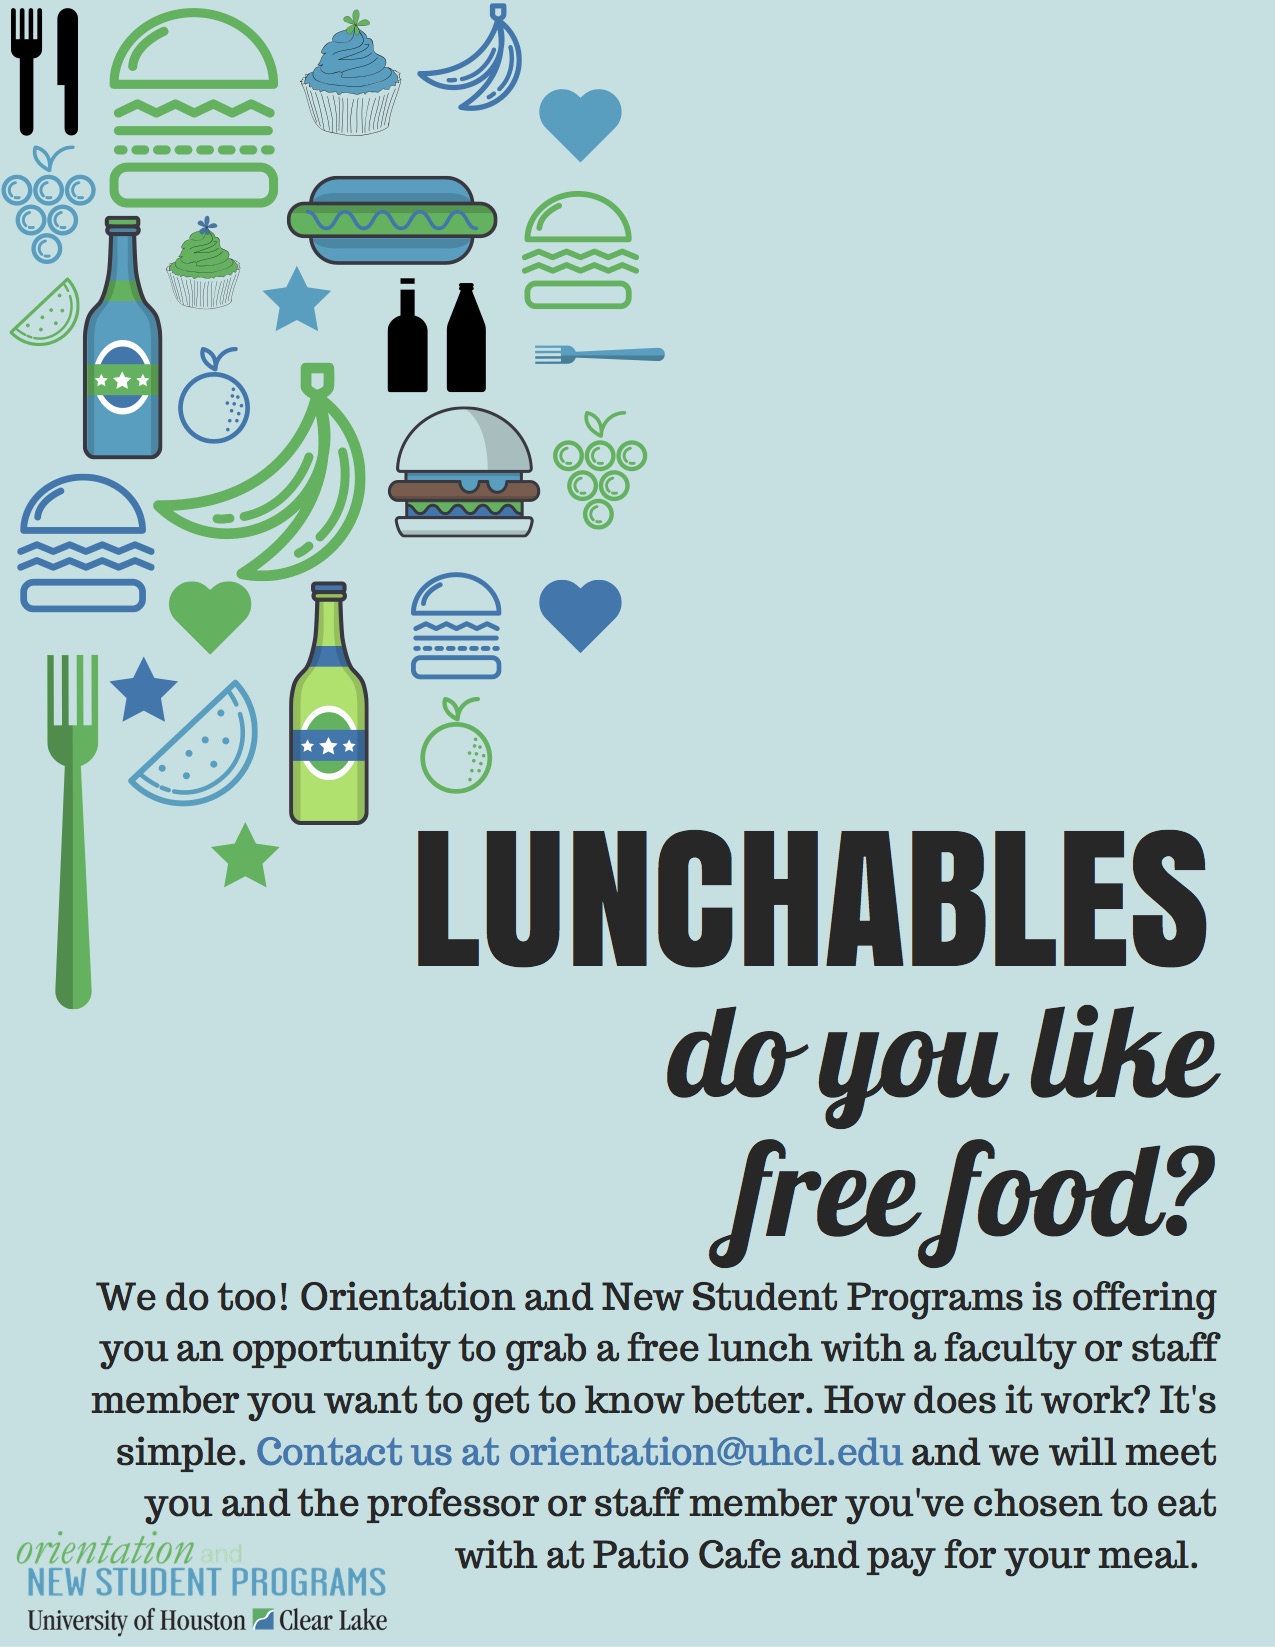 Graphic: Lunchables, do you like free food?